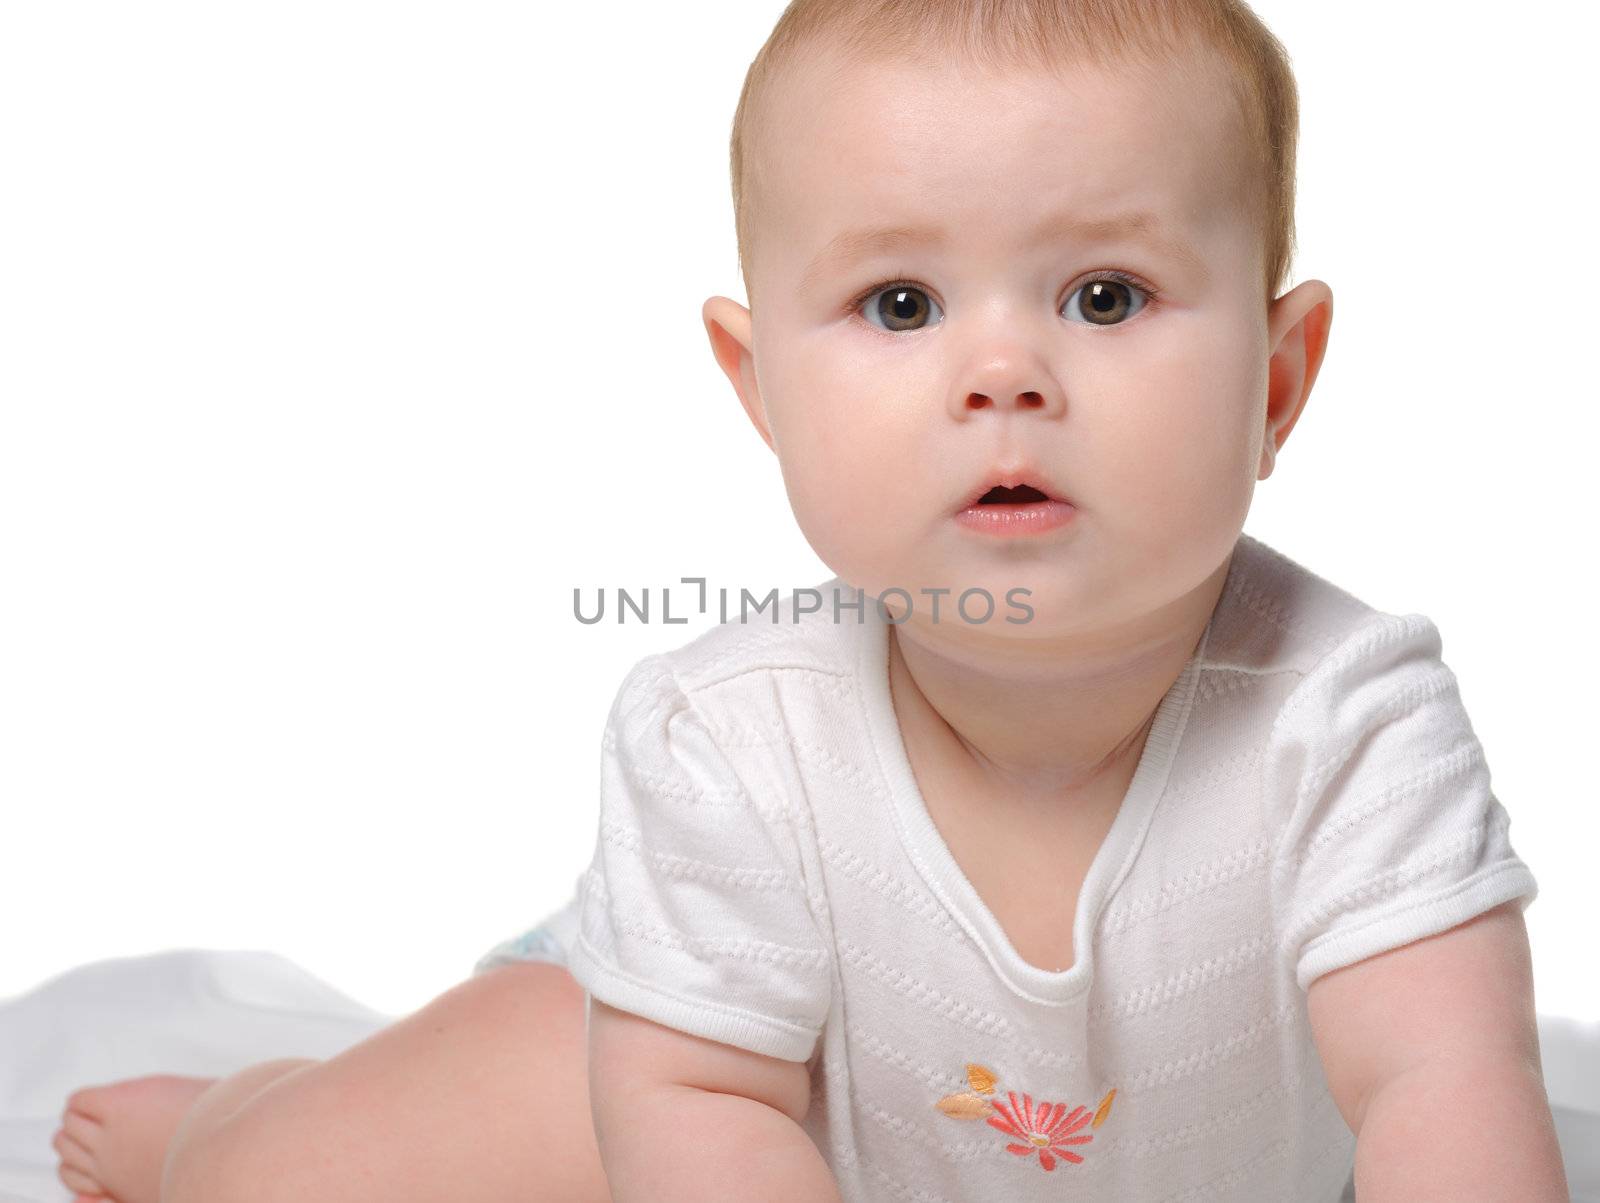 The baby on a bedsheet. Age of 8 months. It is isolated on a white background